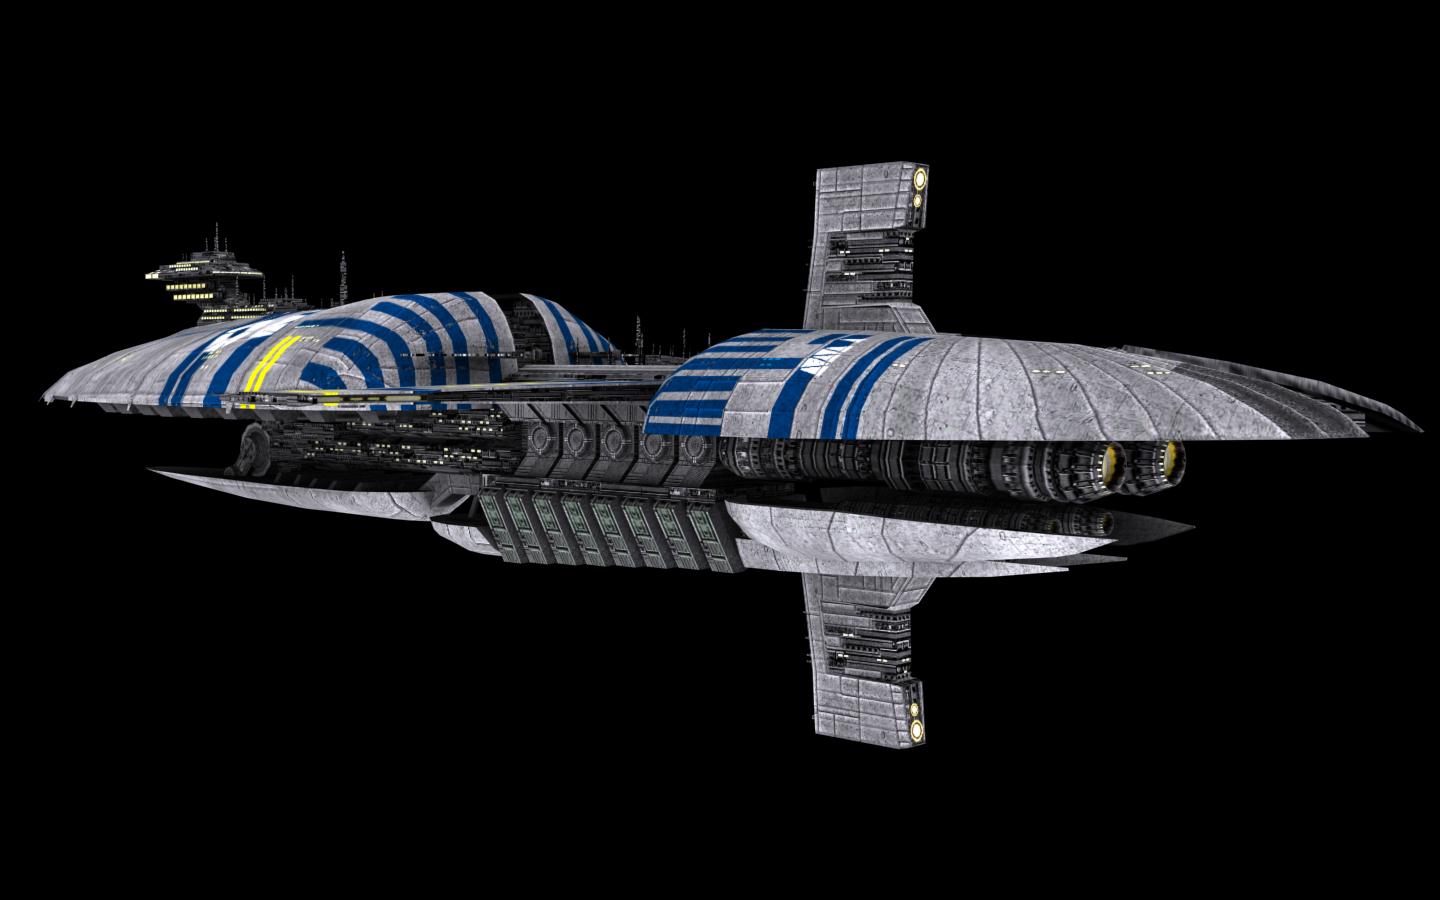 Munificent Class Star Frigate Image Of War: The Clone Wars Mod For Freelancer